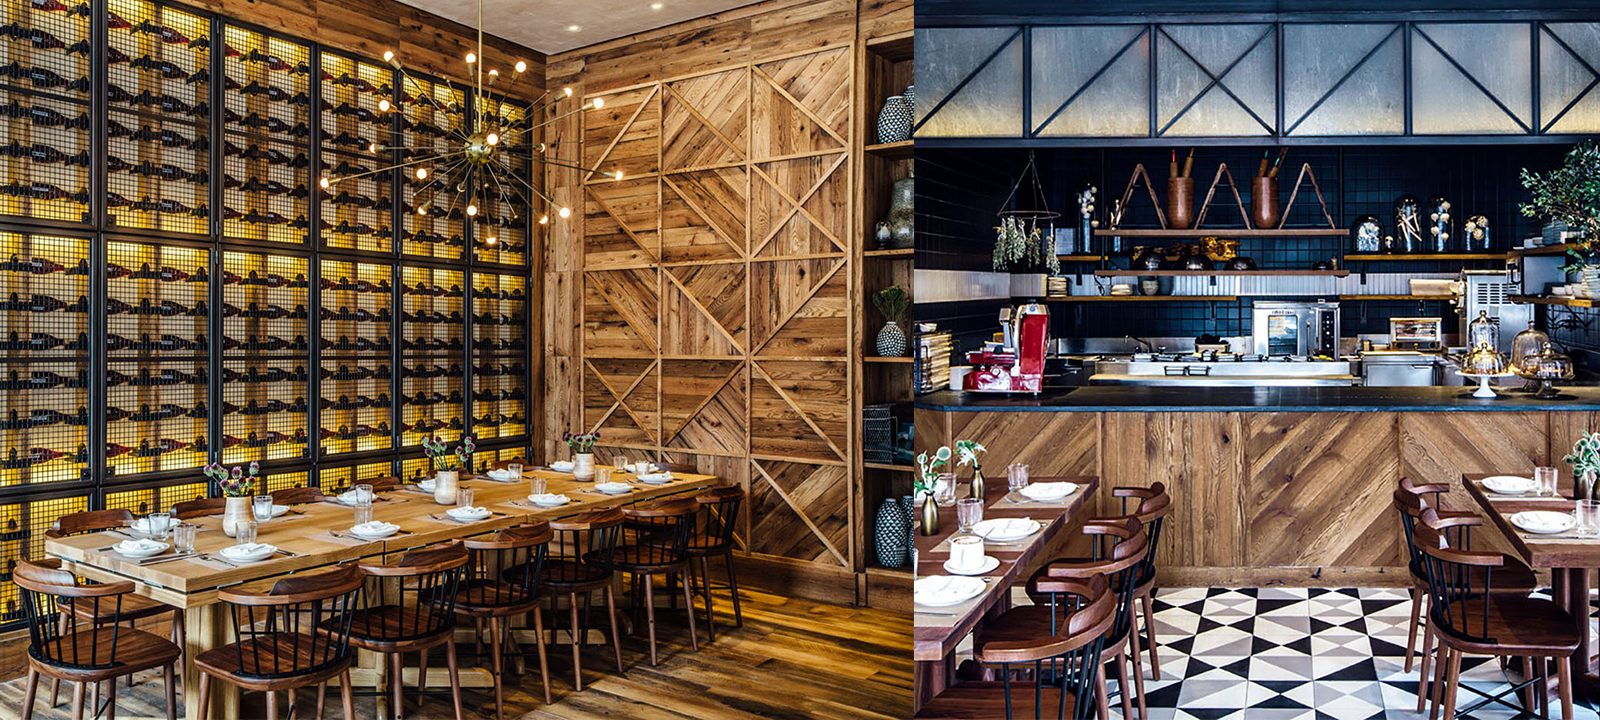 Reclaimed Materials and Panels at NYC Restaurant